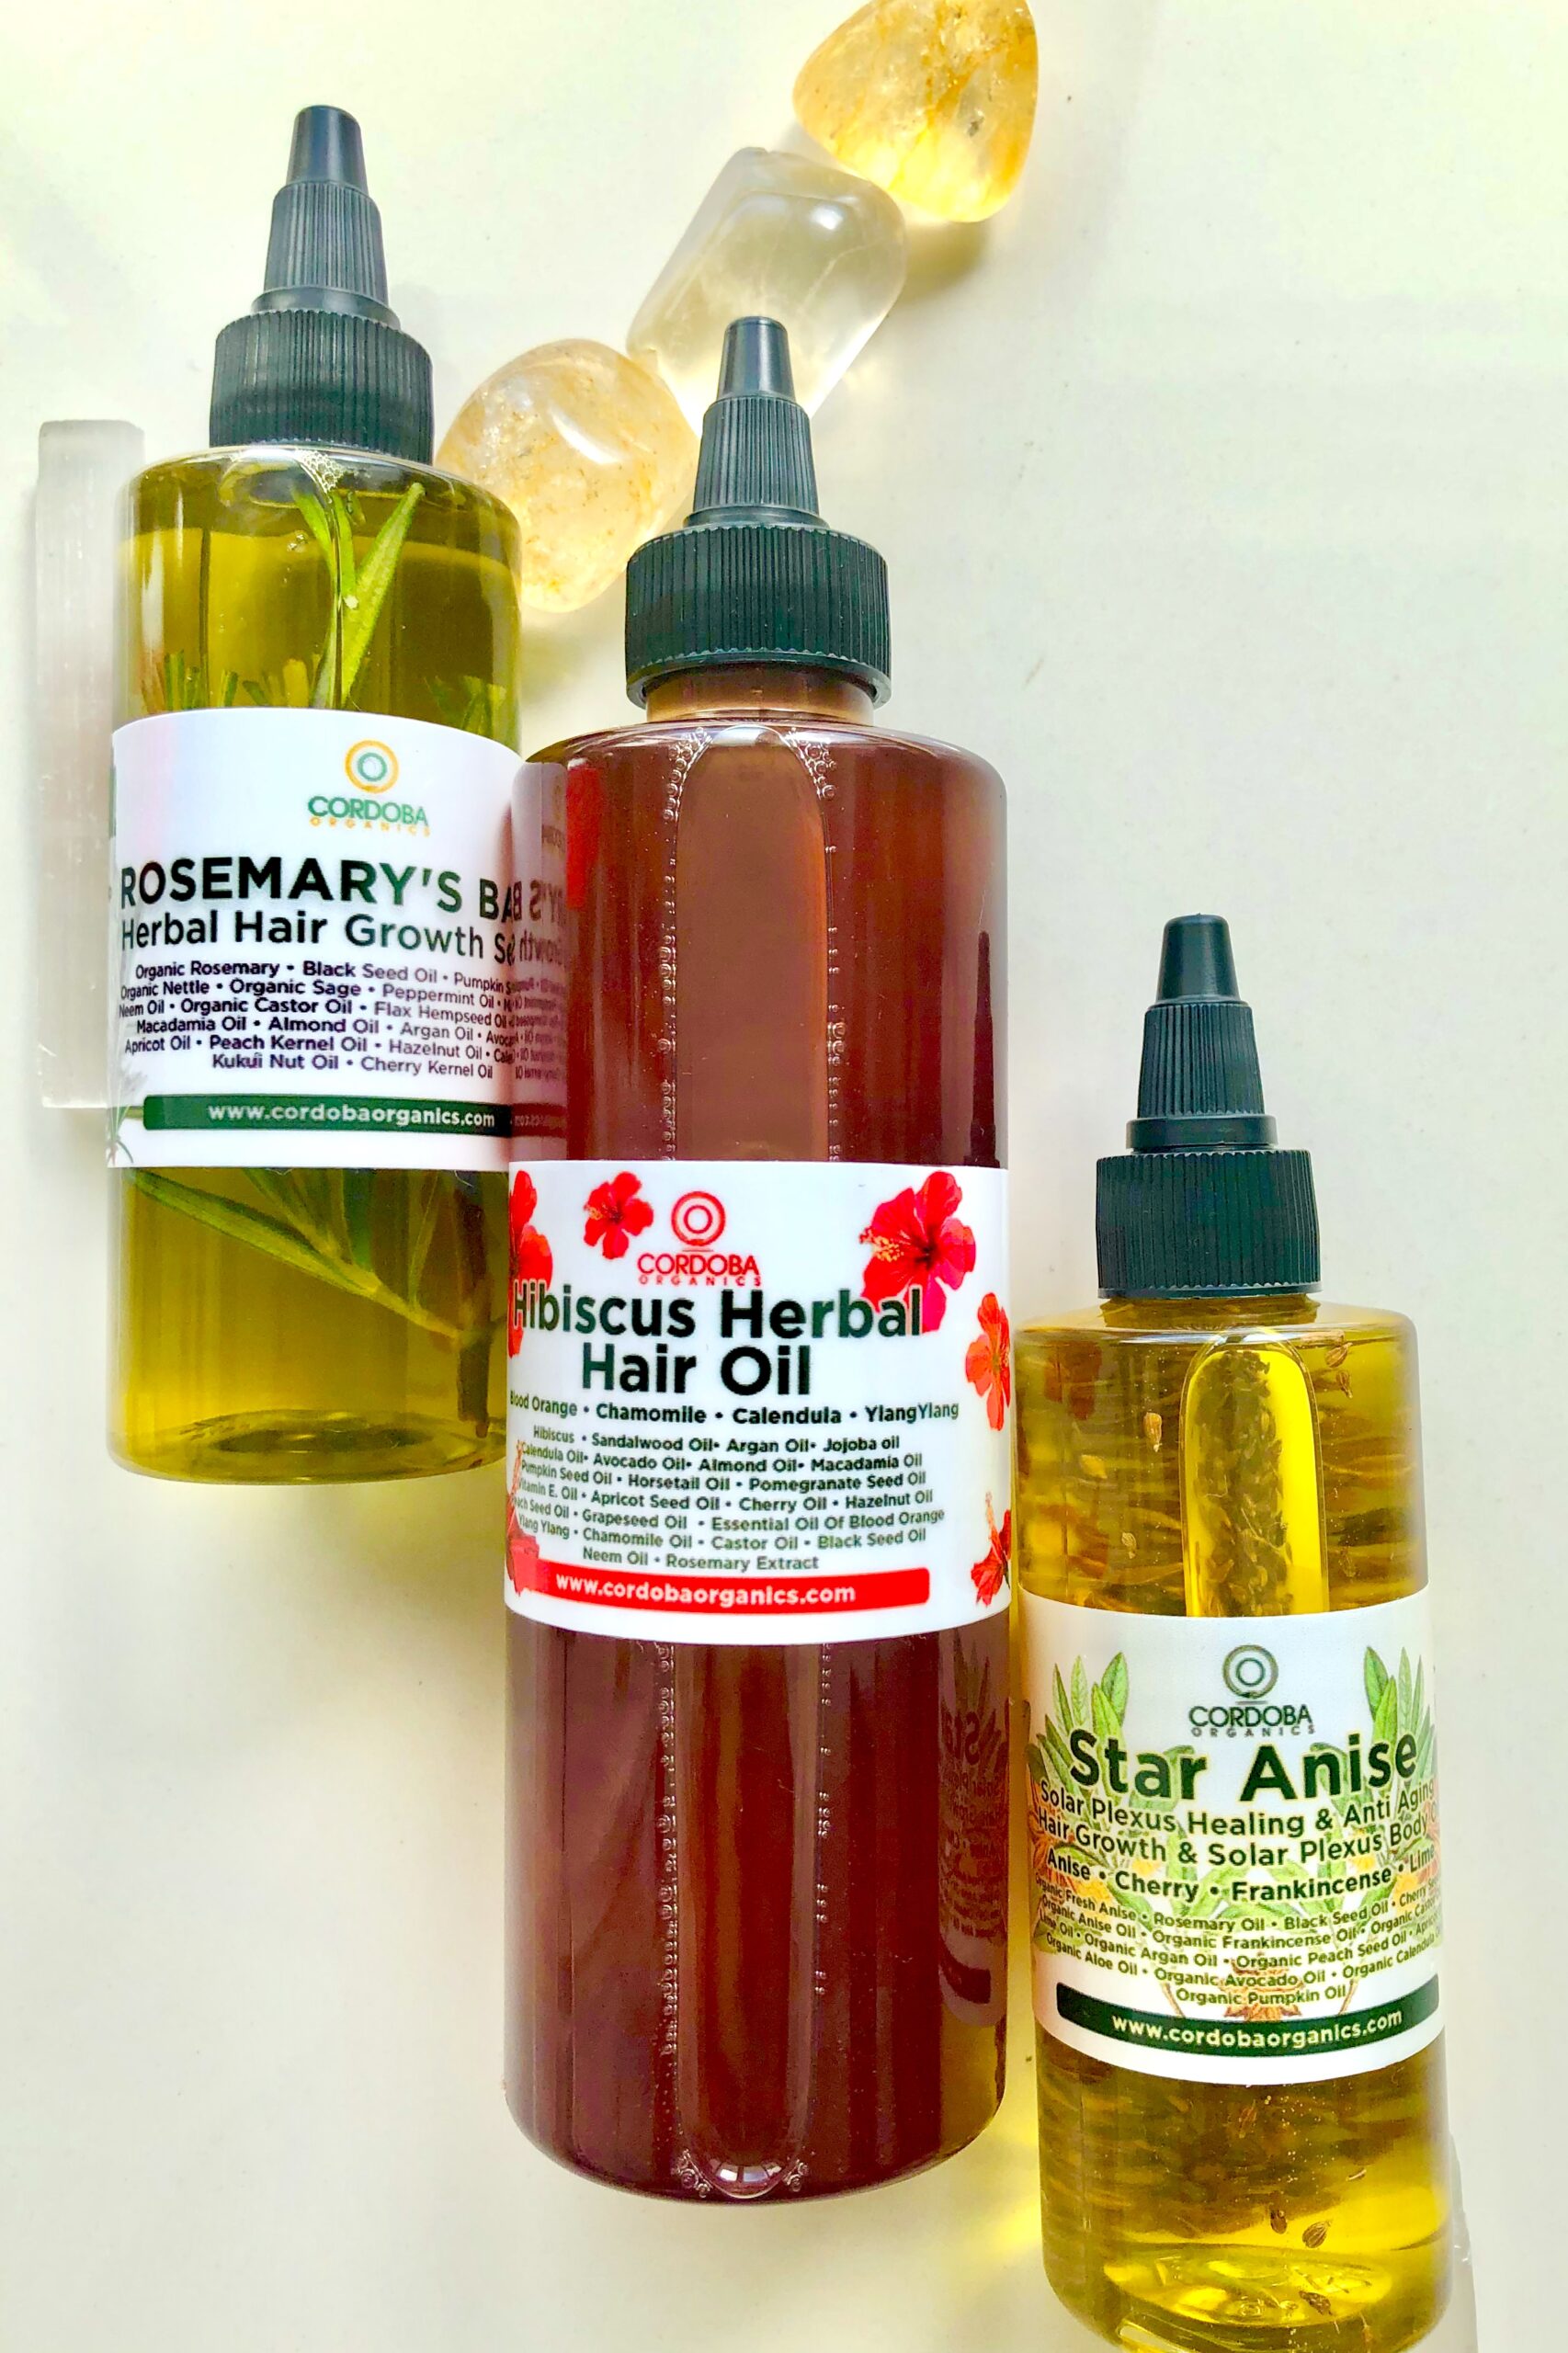 Just Herbs Natural Javakusum Hair Oil - Hibiscus Oil For Hair In India